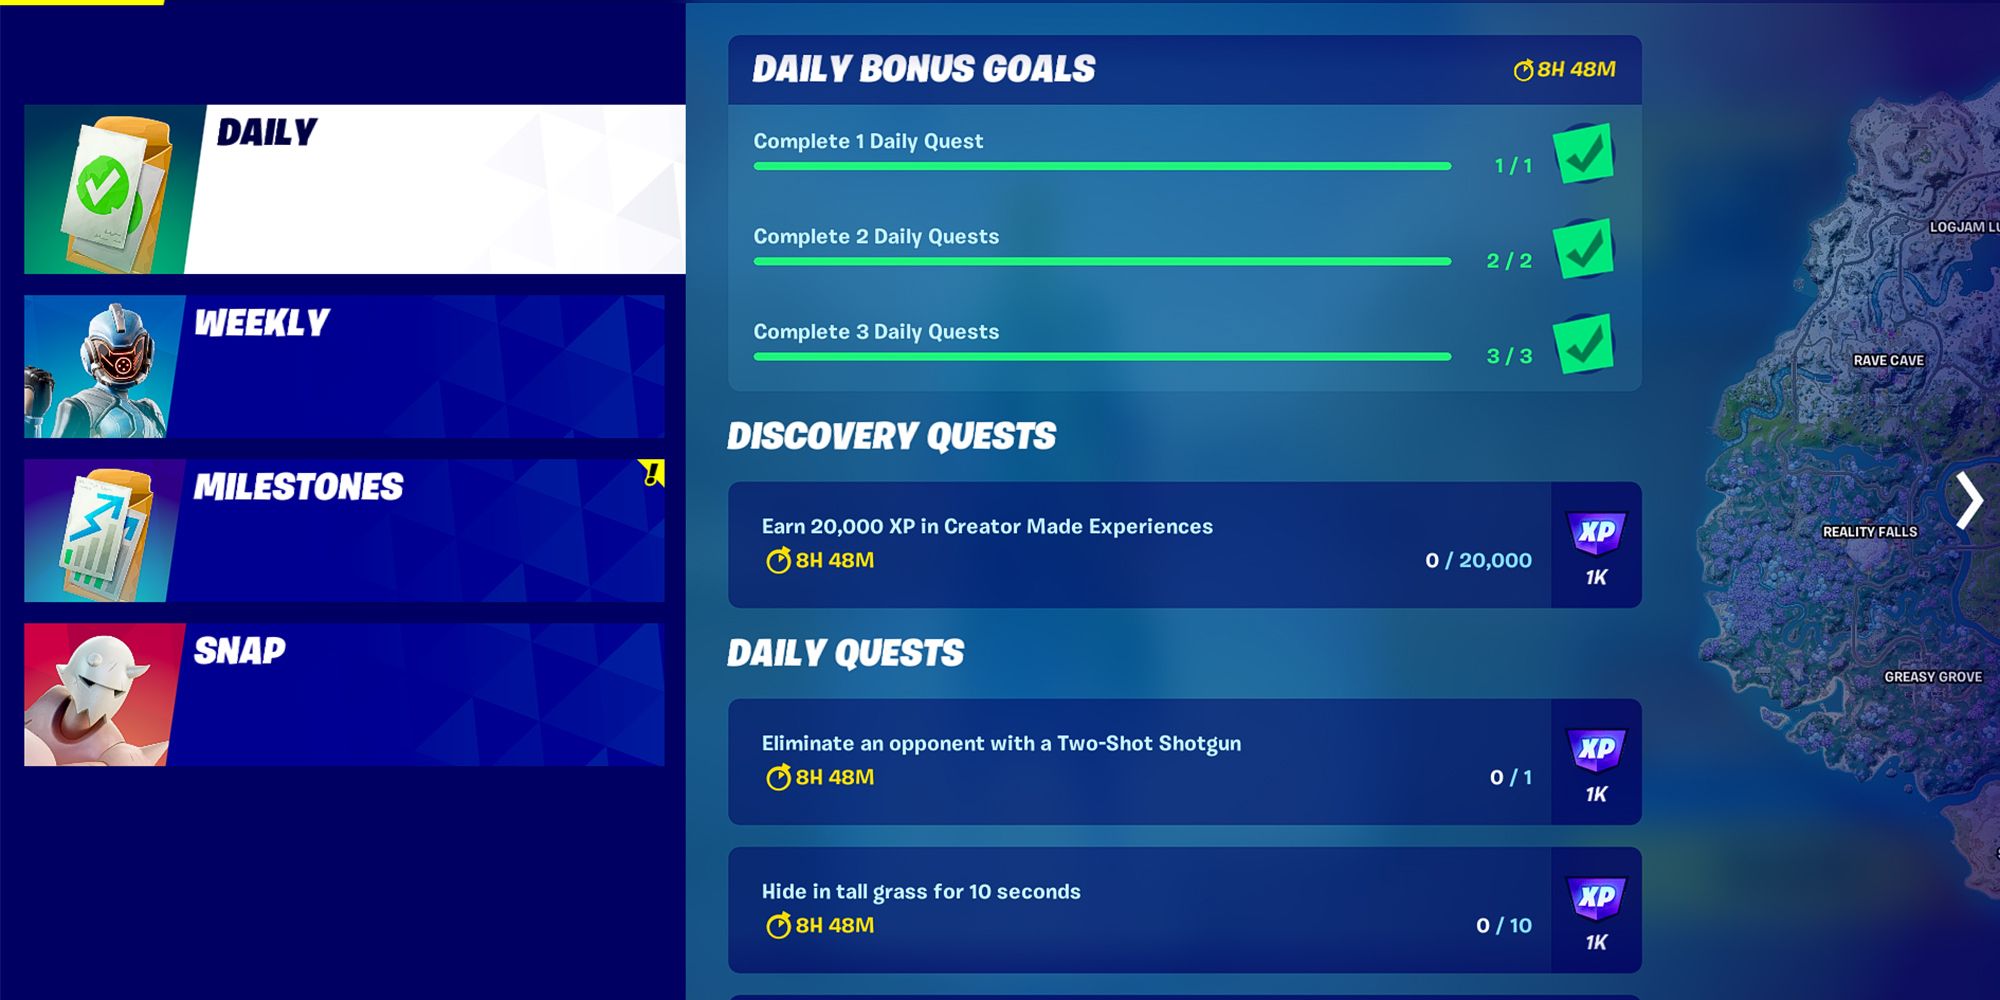 Fortnite - Looking At The Daily Tasks Tab In-Game